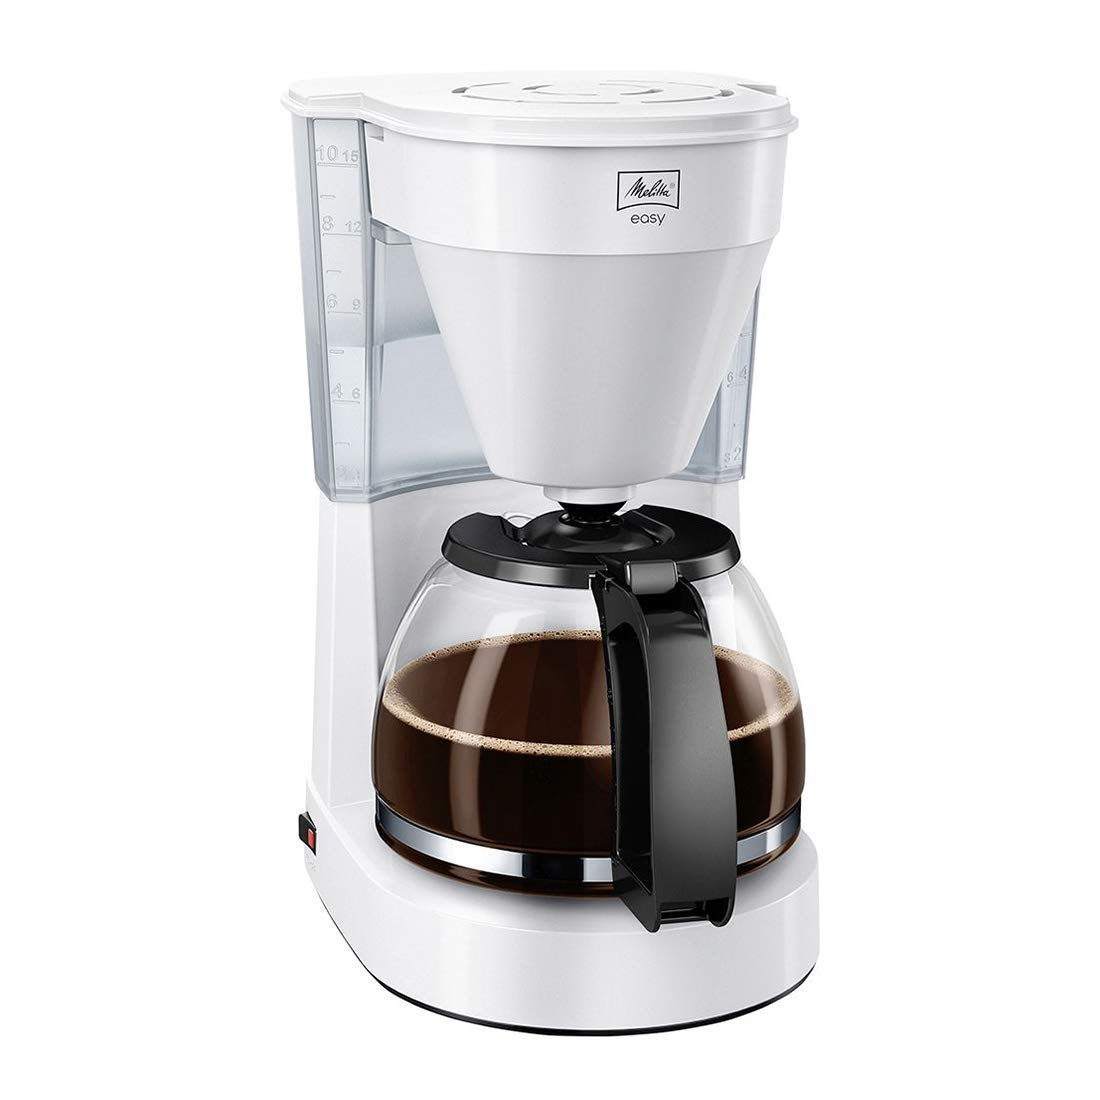 Melitta Easy Filter Coffee Maker With Glass Jug, Compact Design